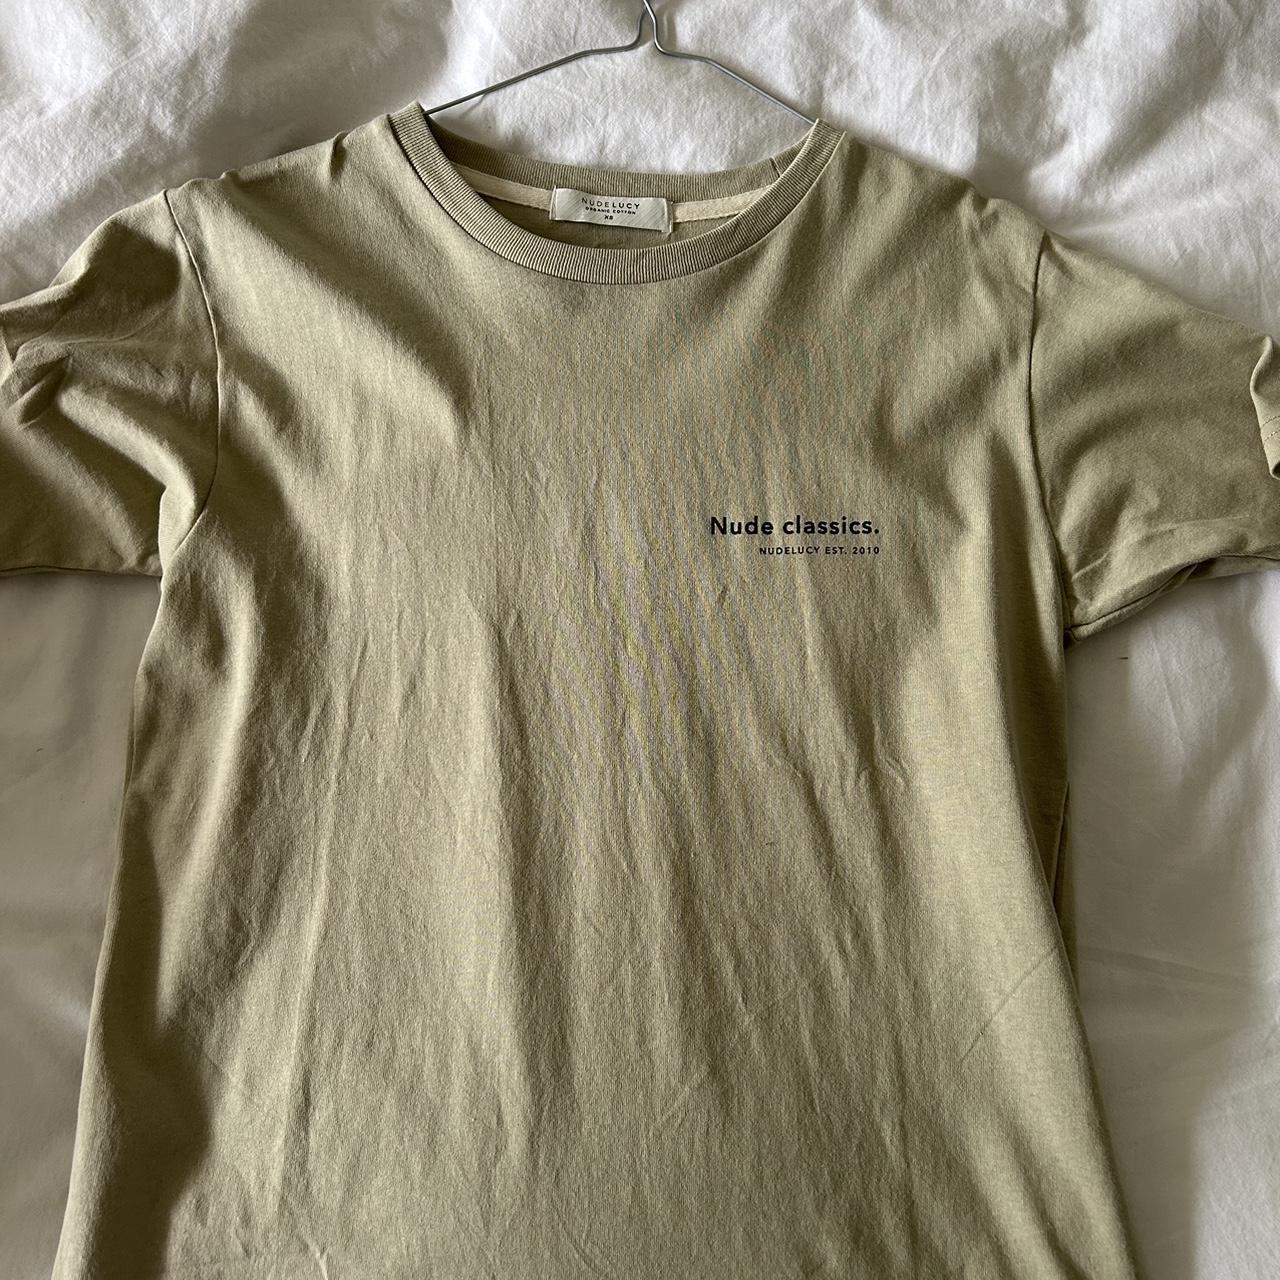 Nude lucy top brand new size xs message me ! - Depop